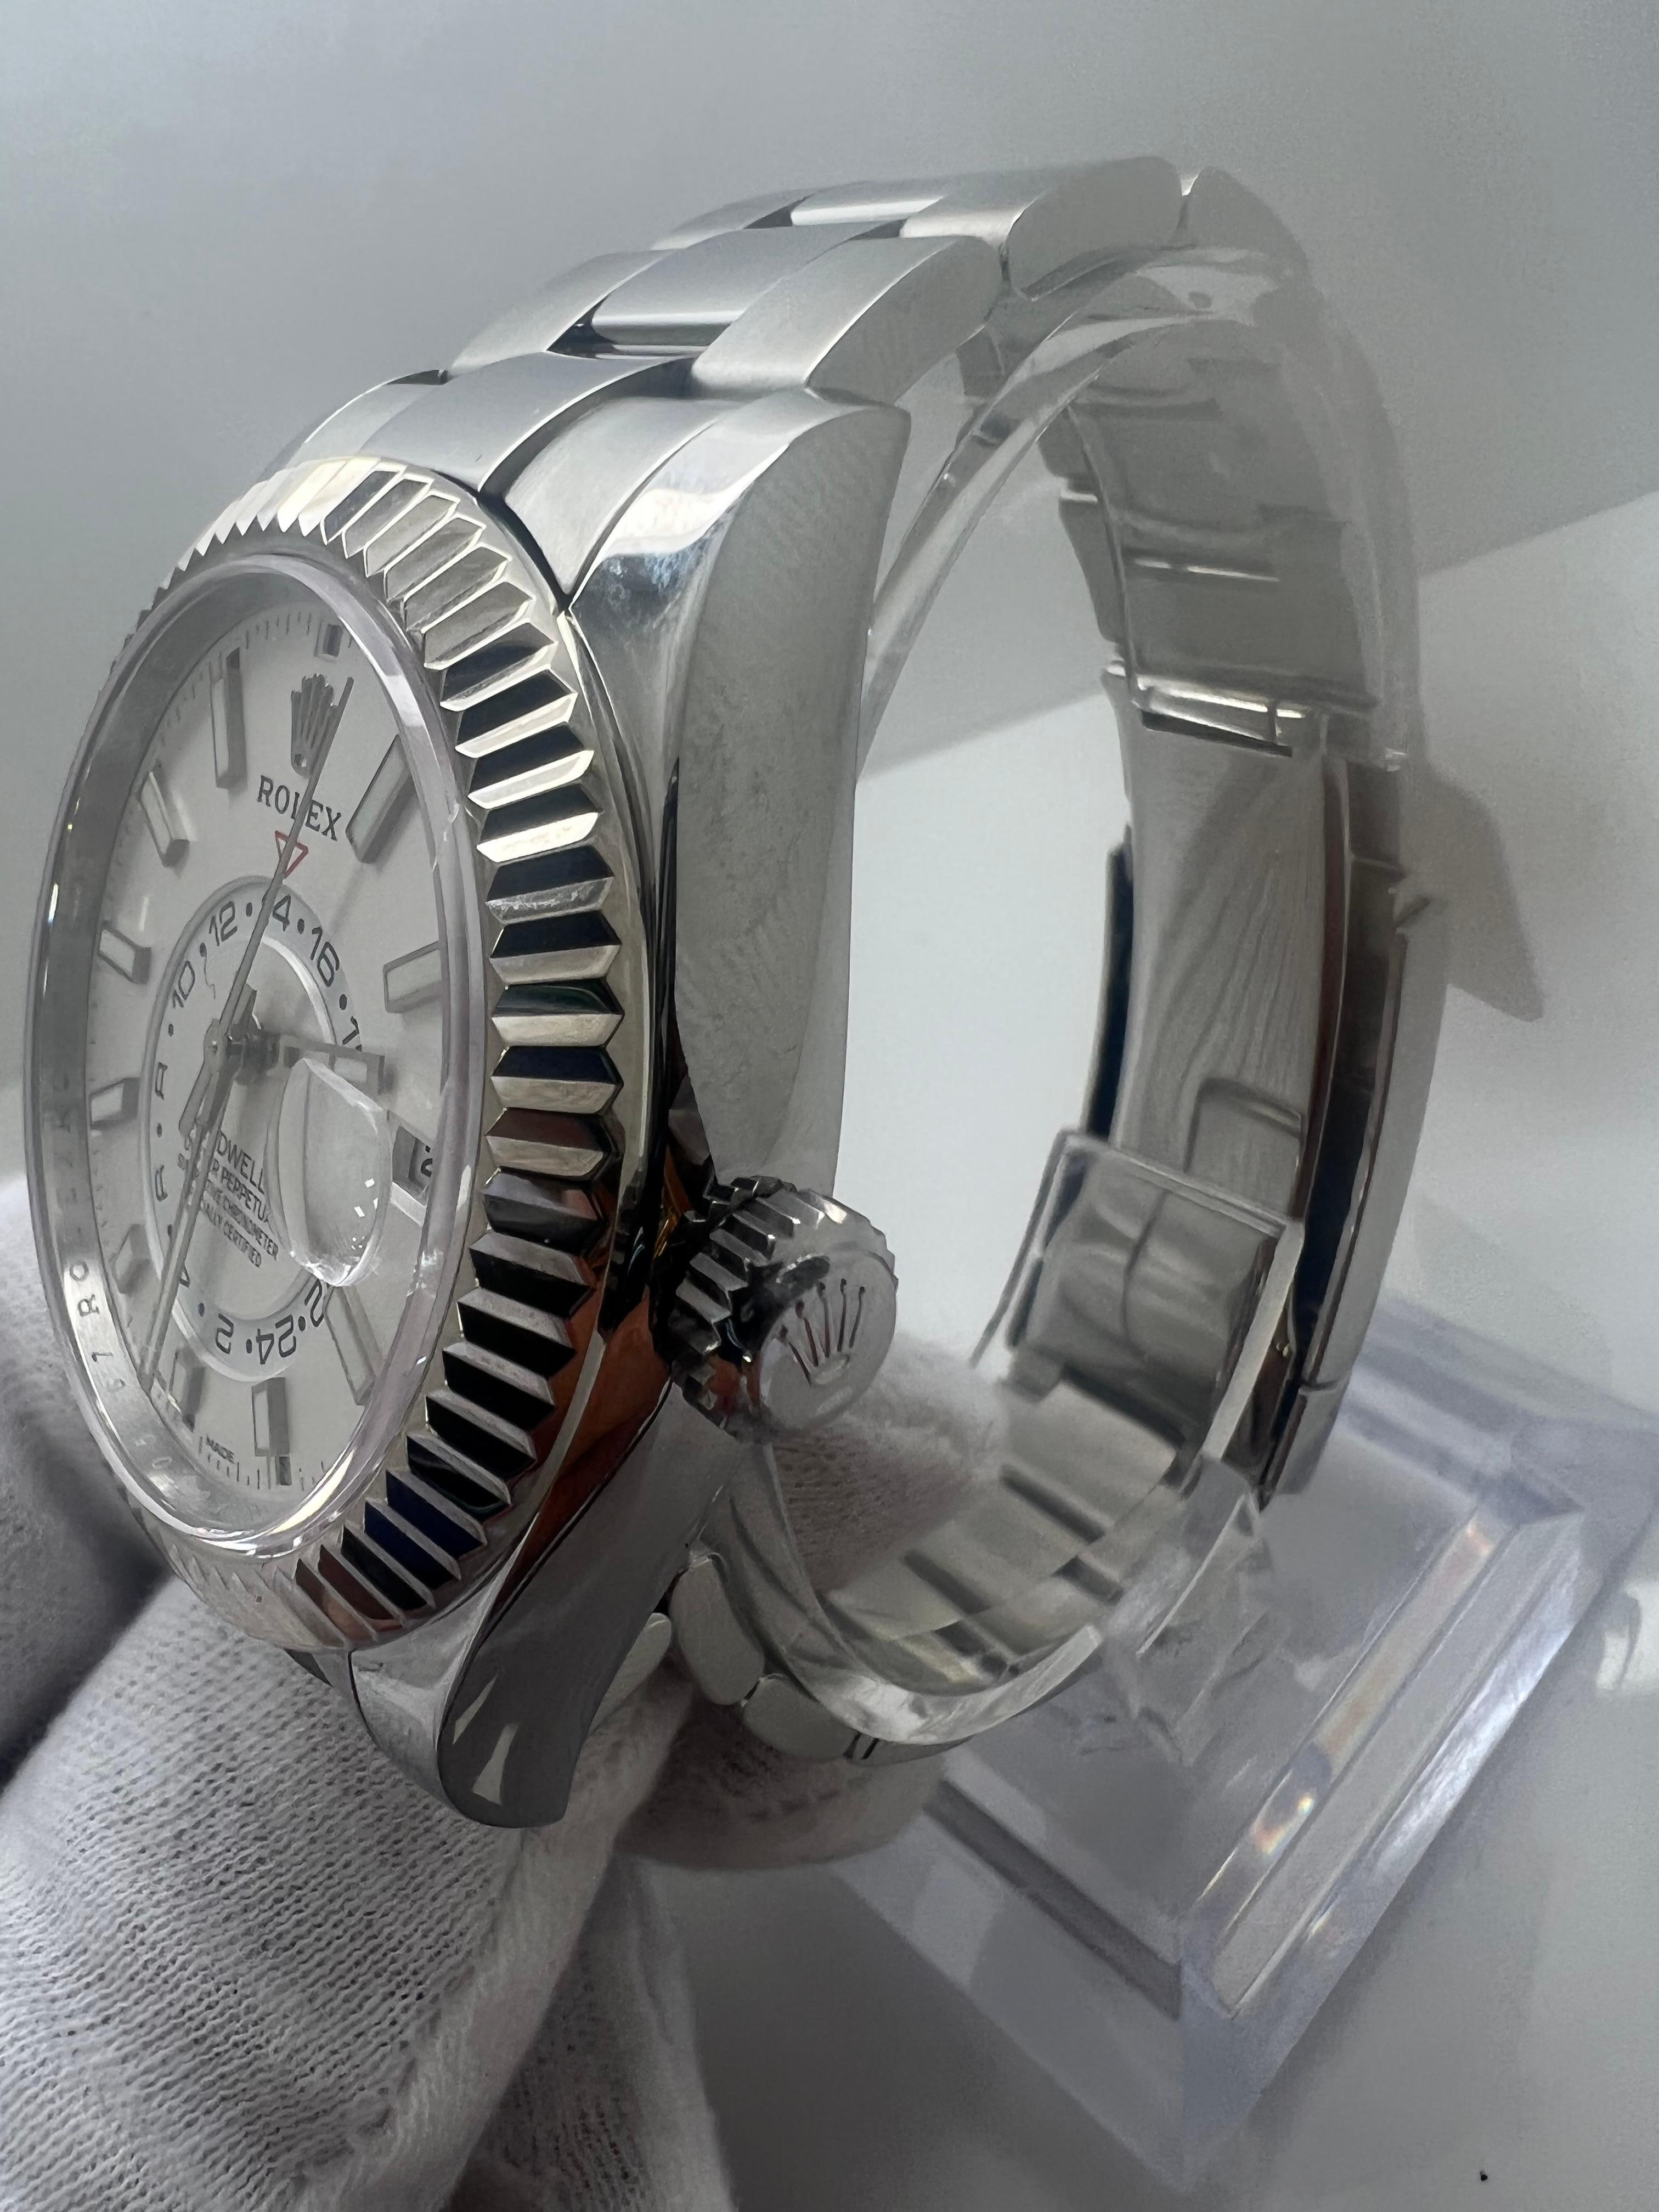 Rolex Sky Dweller 326934 42mm Steel 18K B/P 2019 Mens watch

circa 2019

excellent condition

original box and paperwork

2 years left on warranty from Rolex

free overnight shipping

shop with confidence
